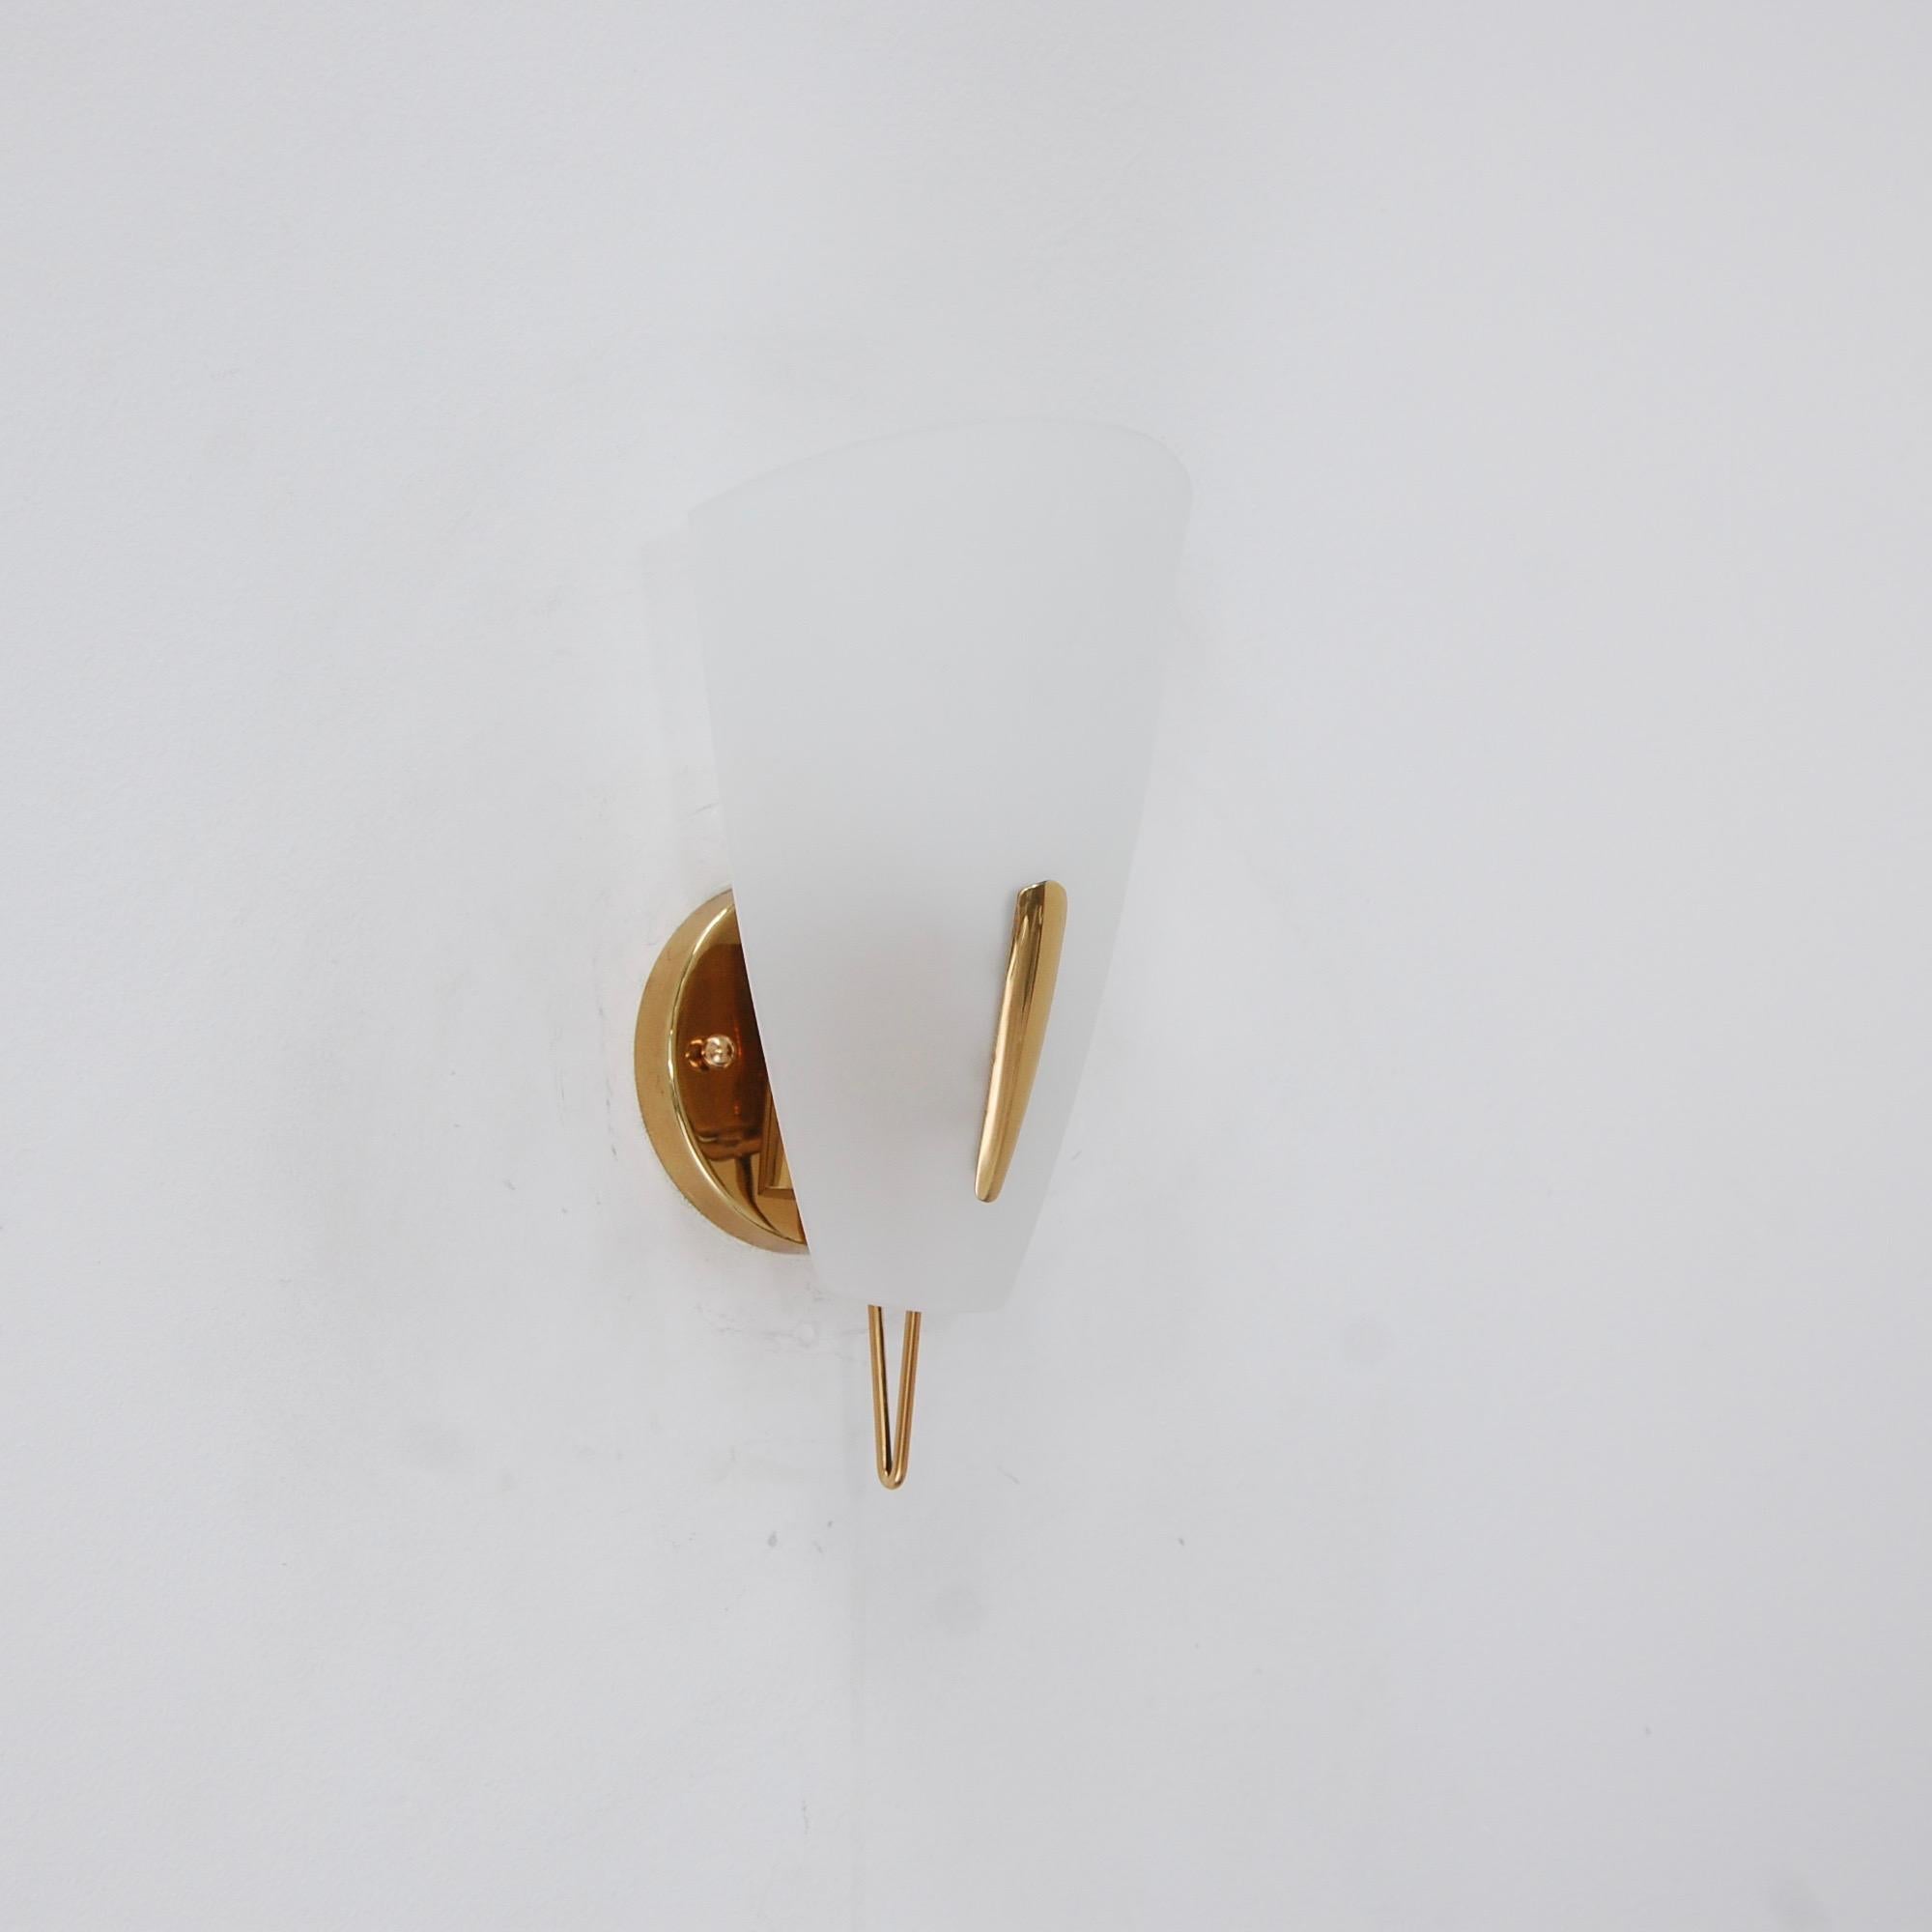 A lovely 1950s brass and glass shield sconce from Mid-Century Modern, Italy. Partially restored. Patinated brass finish and blown glass shade. Single E12 candelabra based socket. Currently wired for use in the US. 4” back plate. Priced individually.